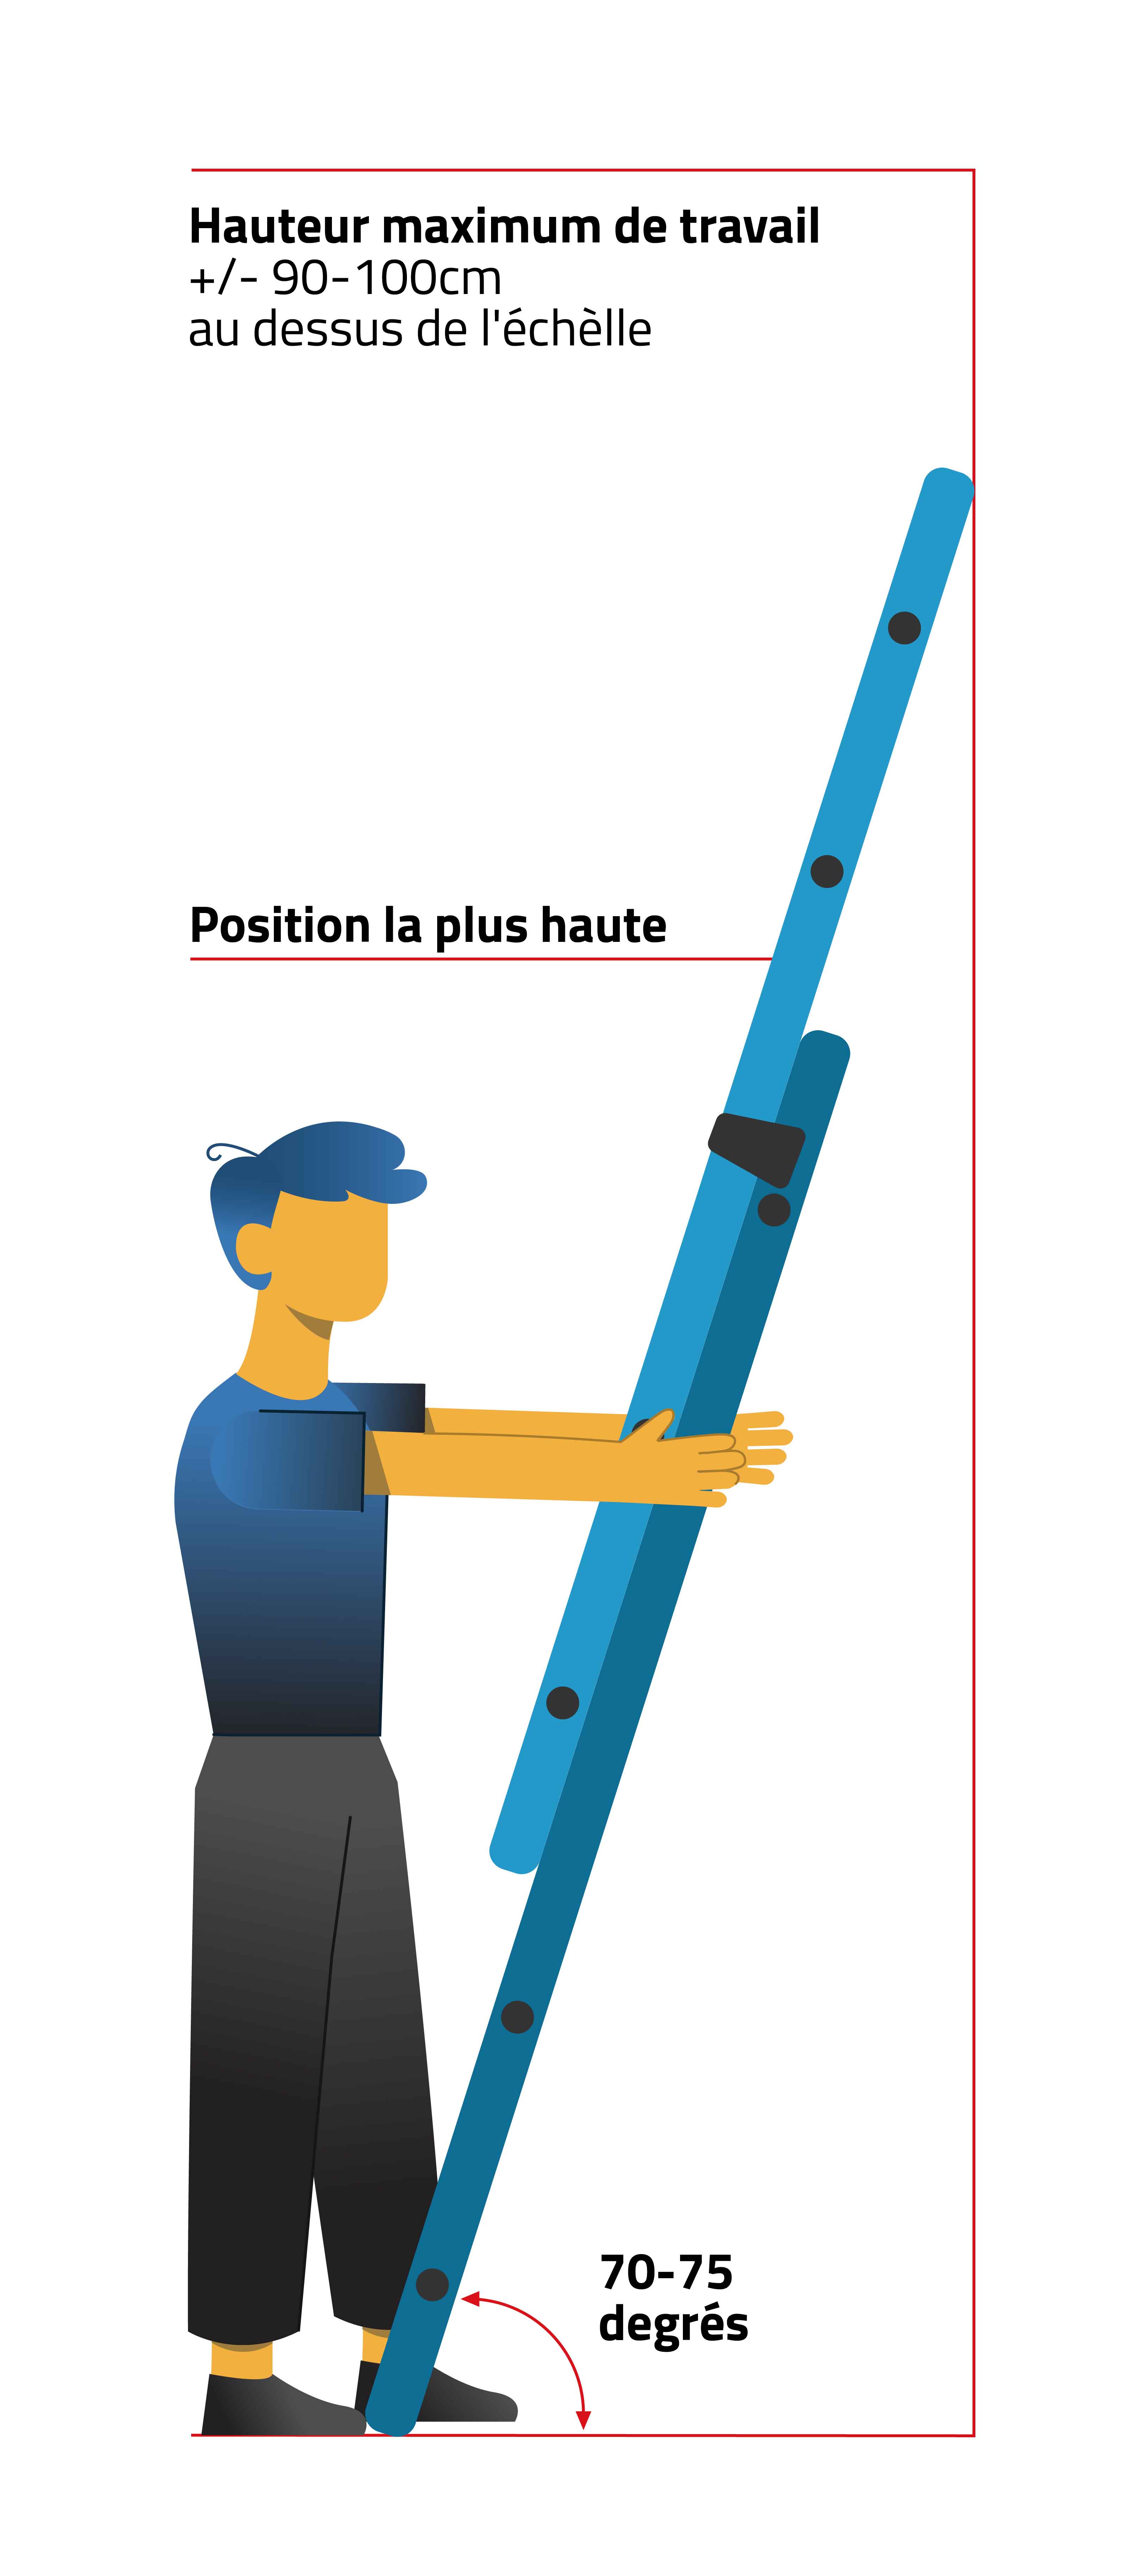 Climbing material - ladder max working height